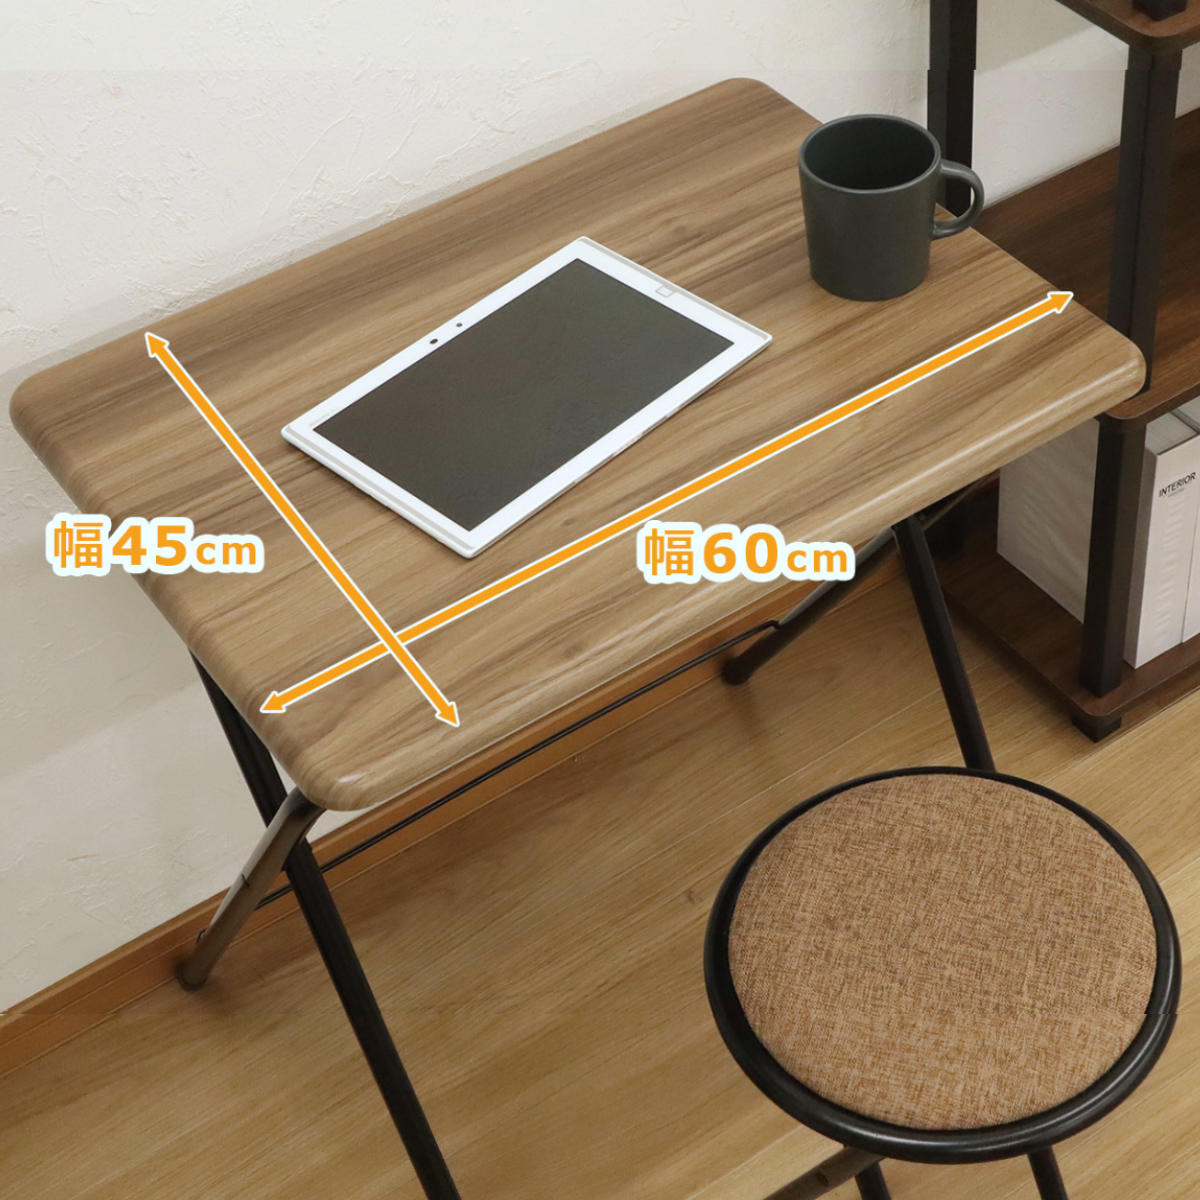  folding chair table set bearing surface height 47cm ( compact folding chair chair stool desk desk simple chair simple desk )